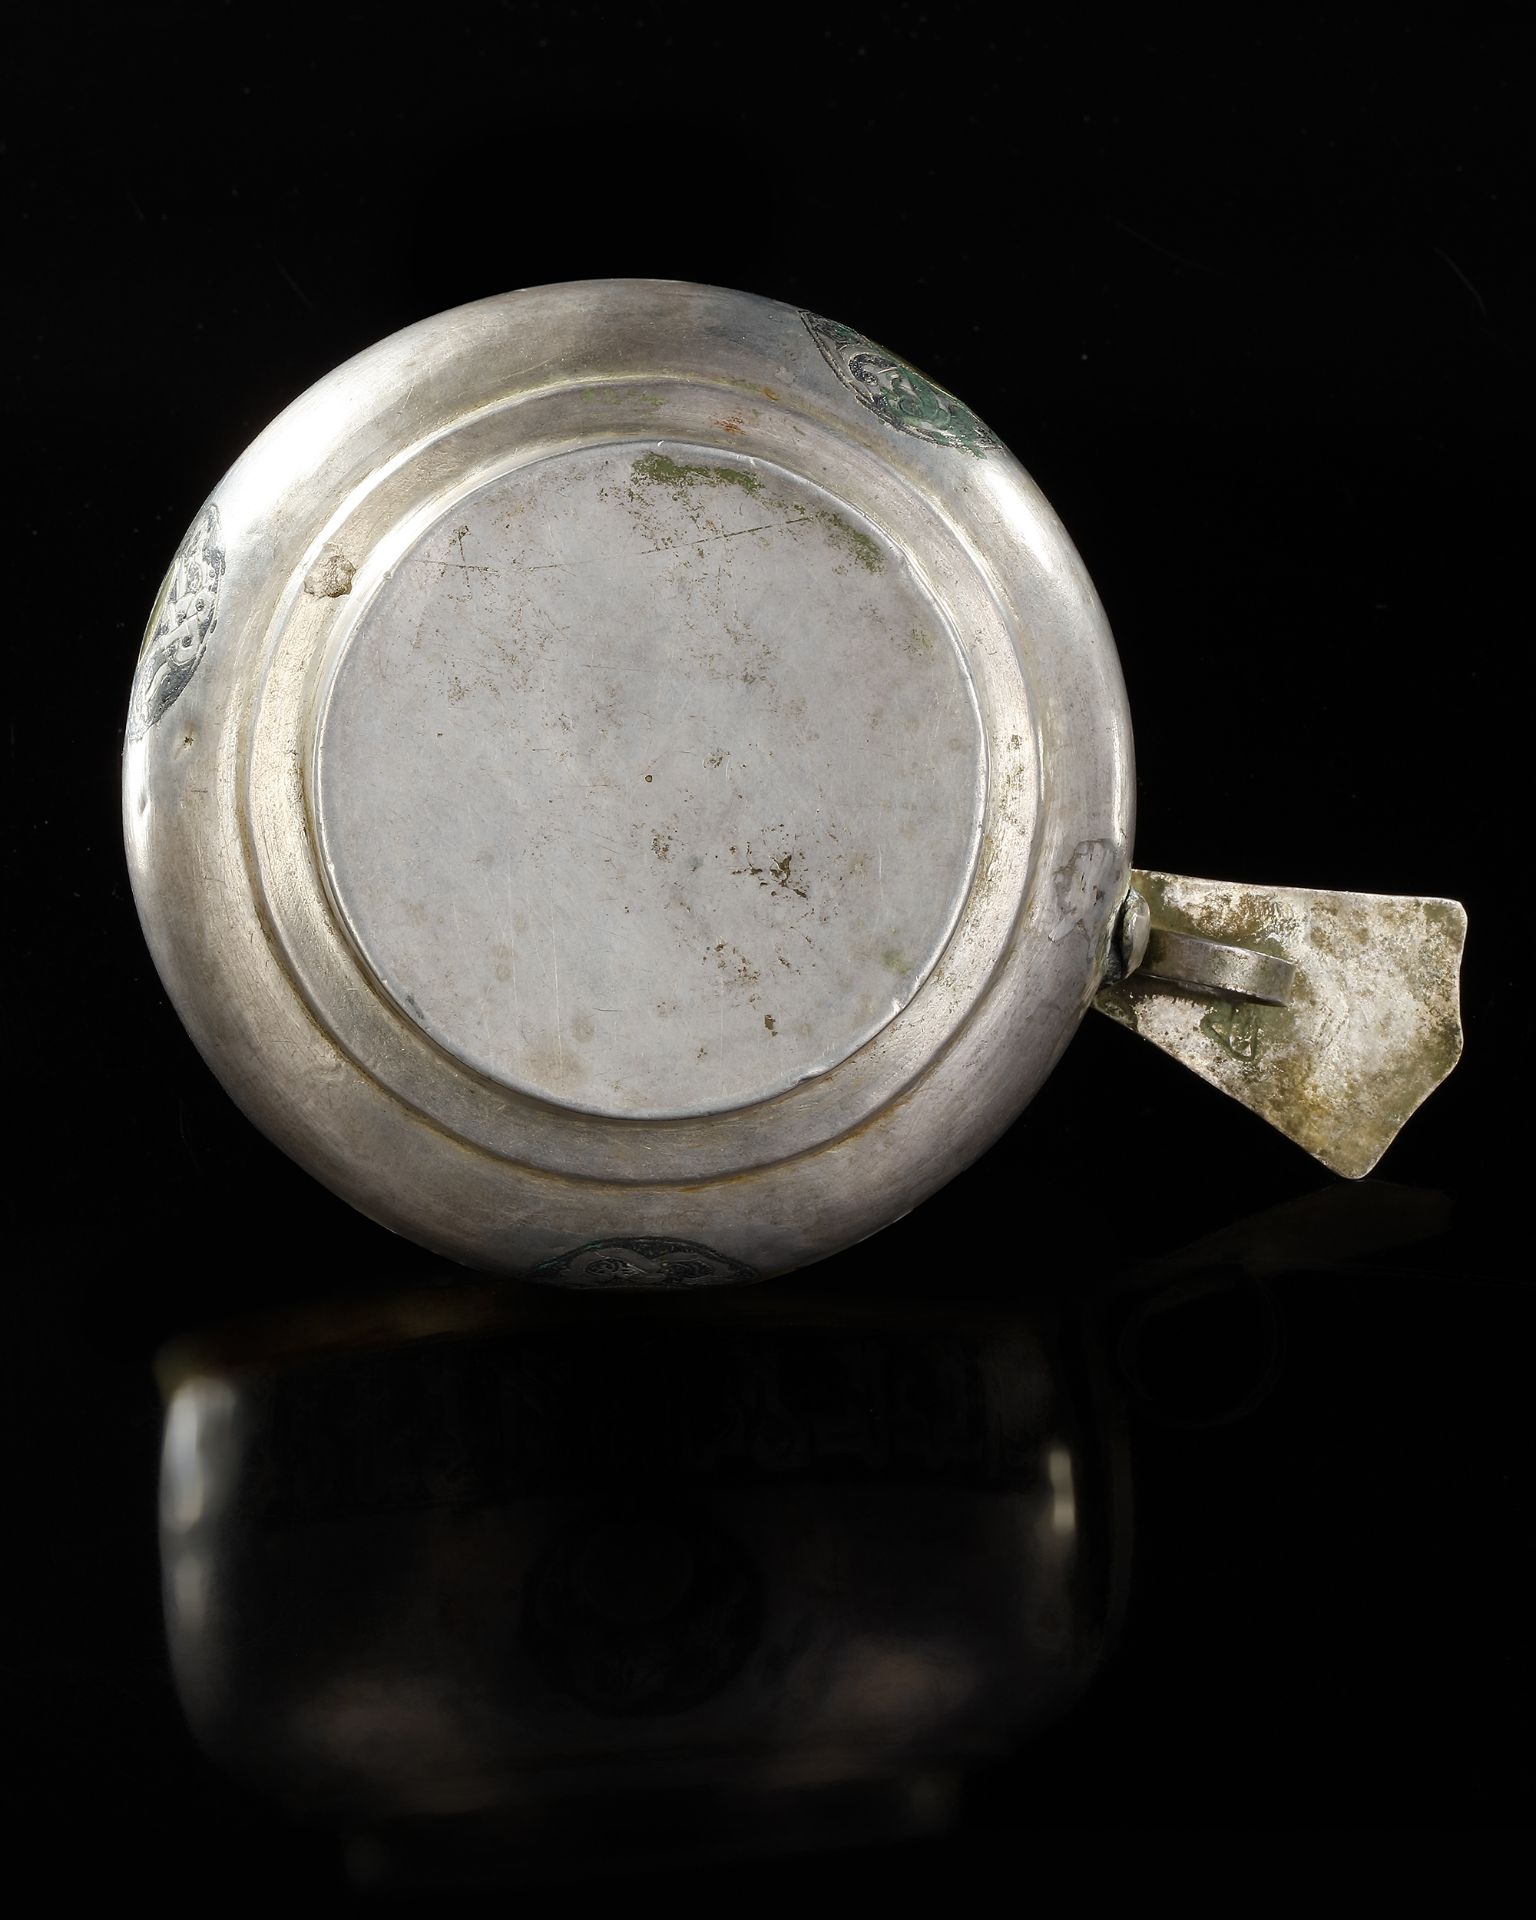 A RARE SILVER AND NIELLOED CUP WITH KUFIC INSCRIPTION, PERSIA OR CENTRAL ASIA, 11TH-12TH CENTURY - Image 21 of 34